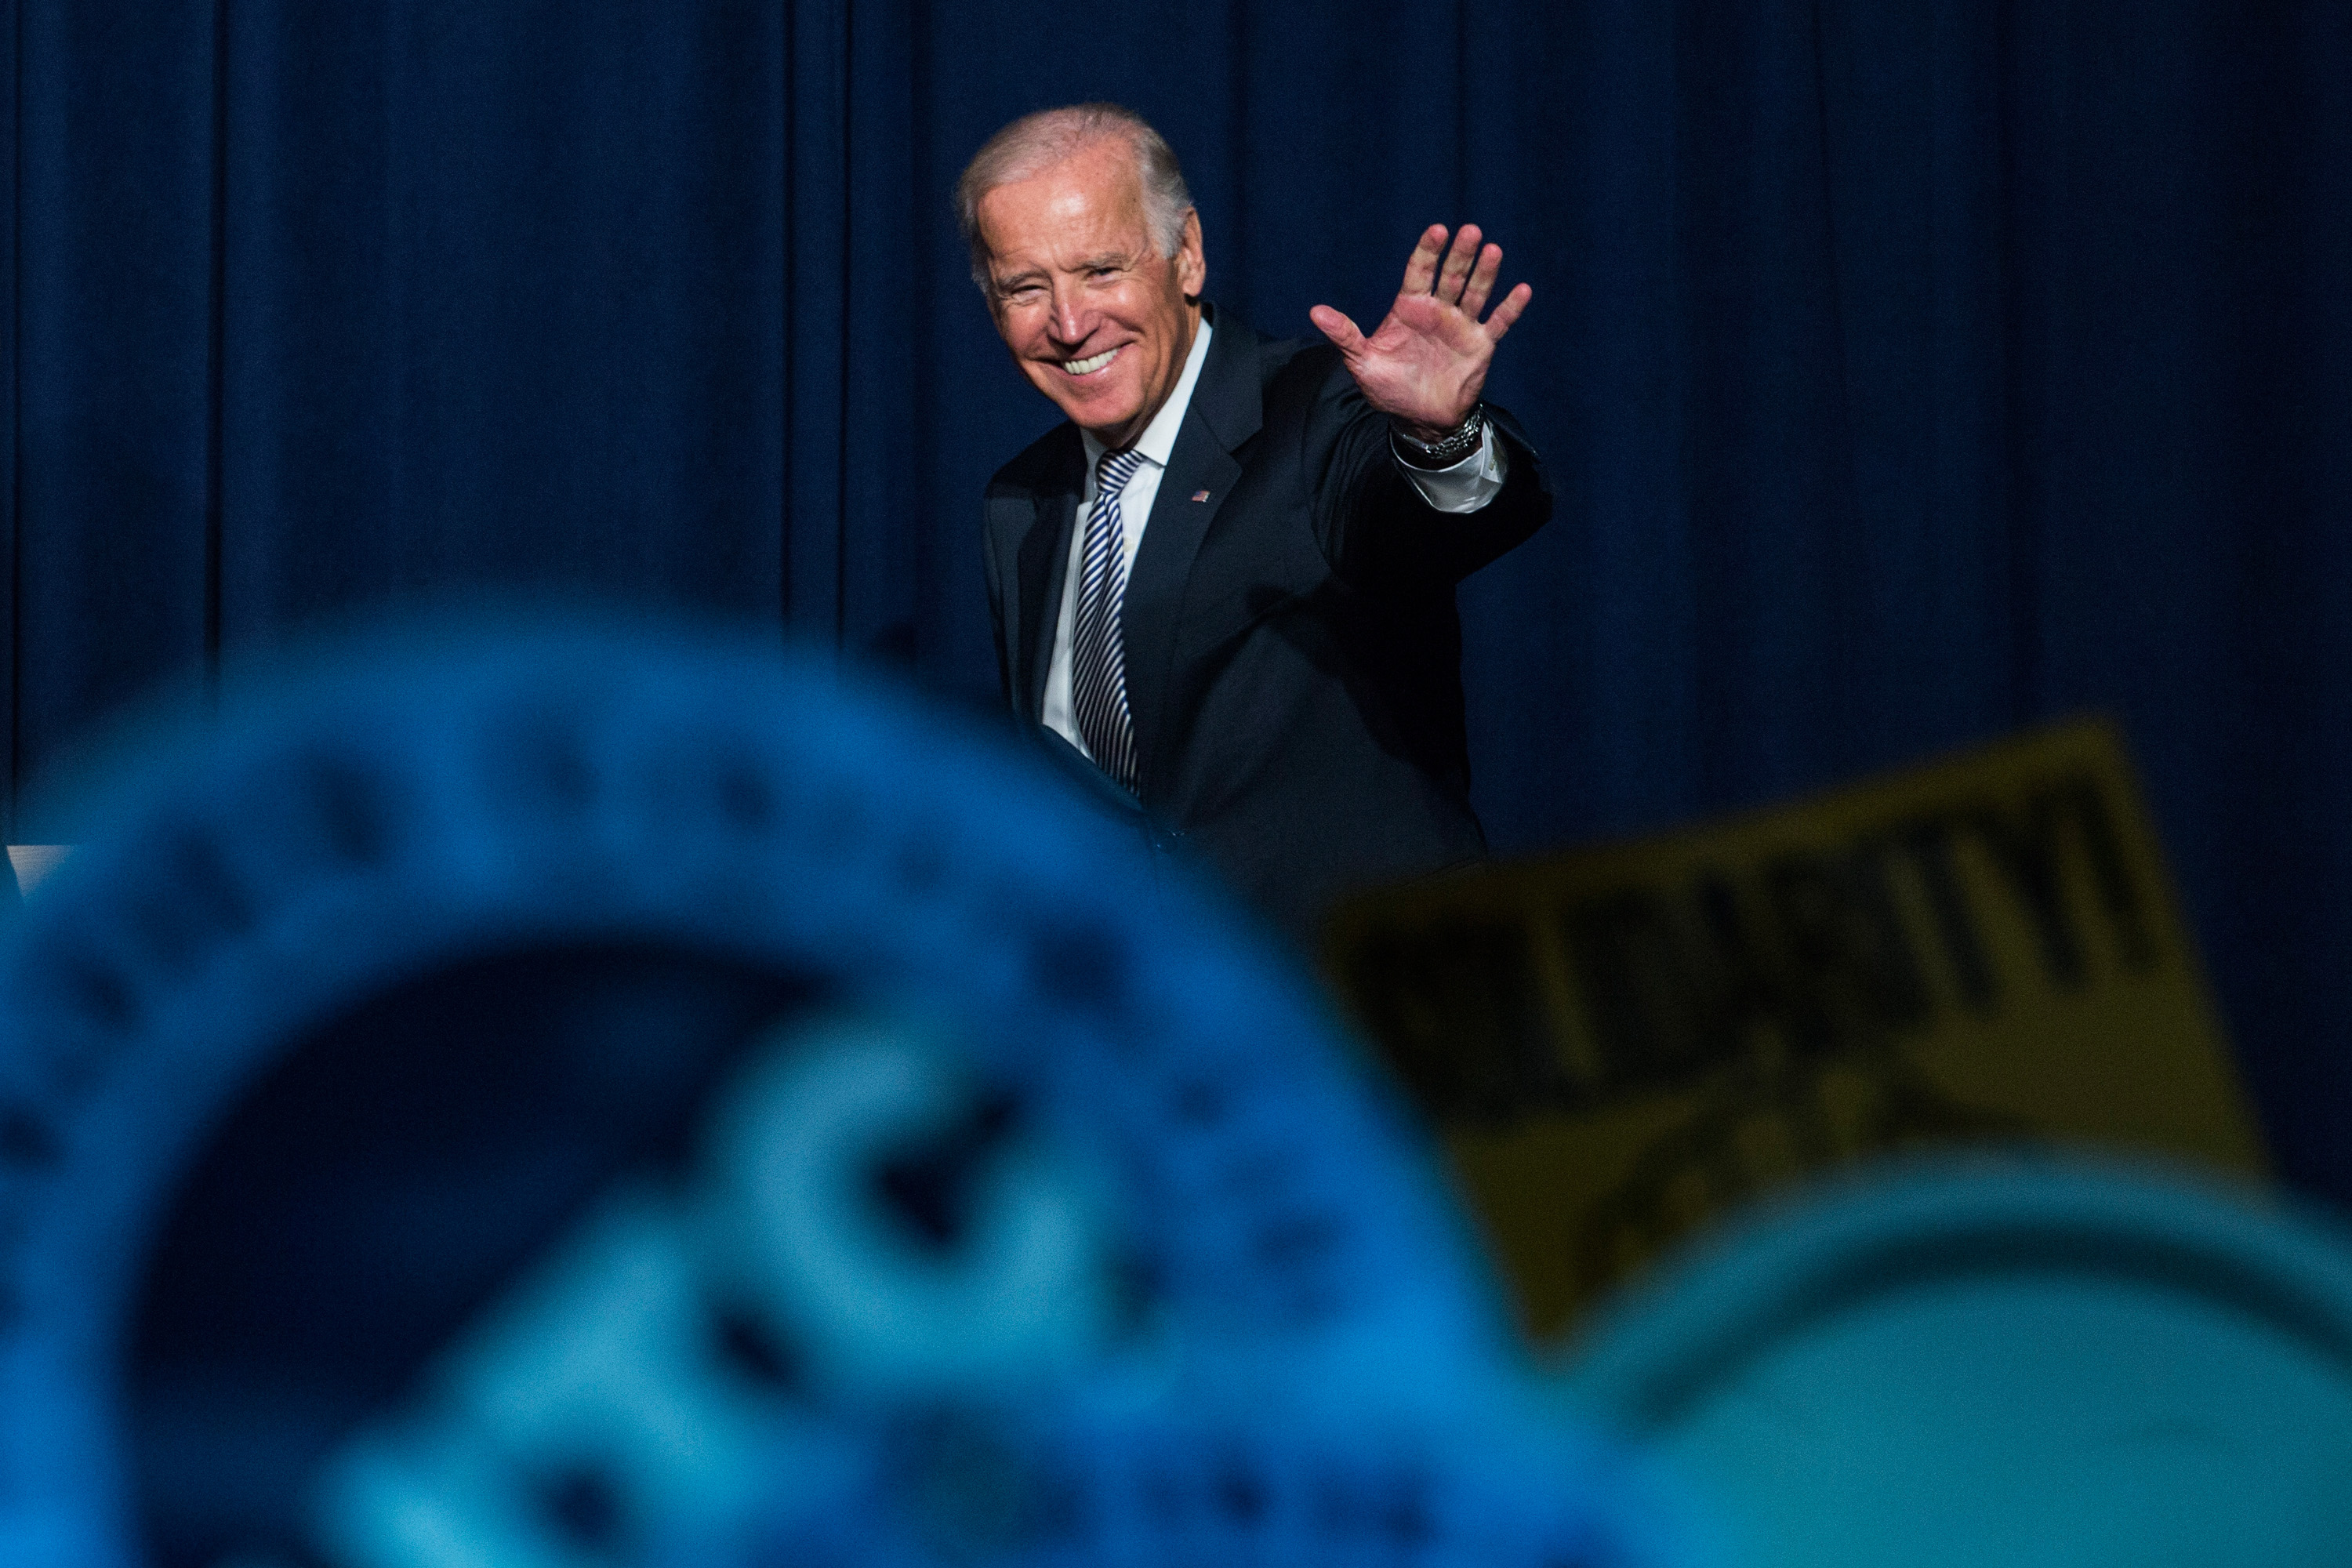 Joe Biden arrives at a rally to support of raising the minimum wage for the state of New York to $15 per hour on September 10, 2015. (Andrew Burton—Getty Images)